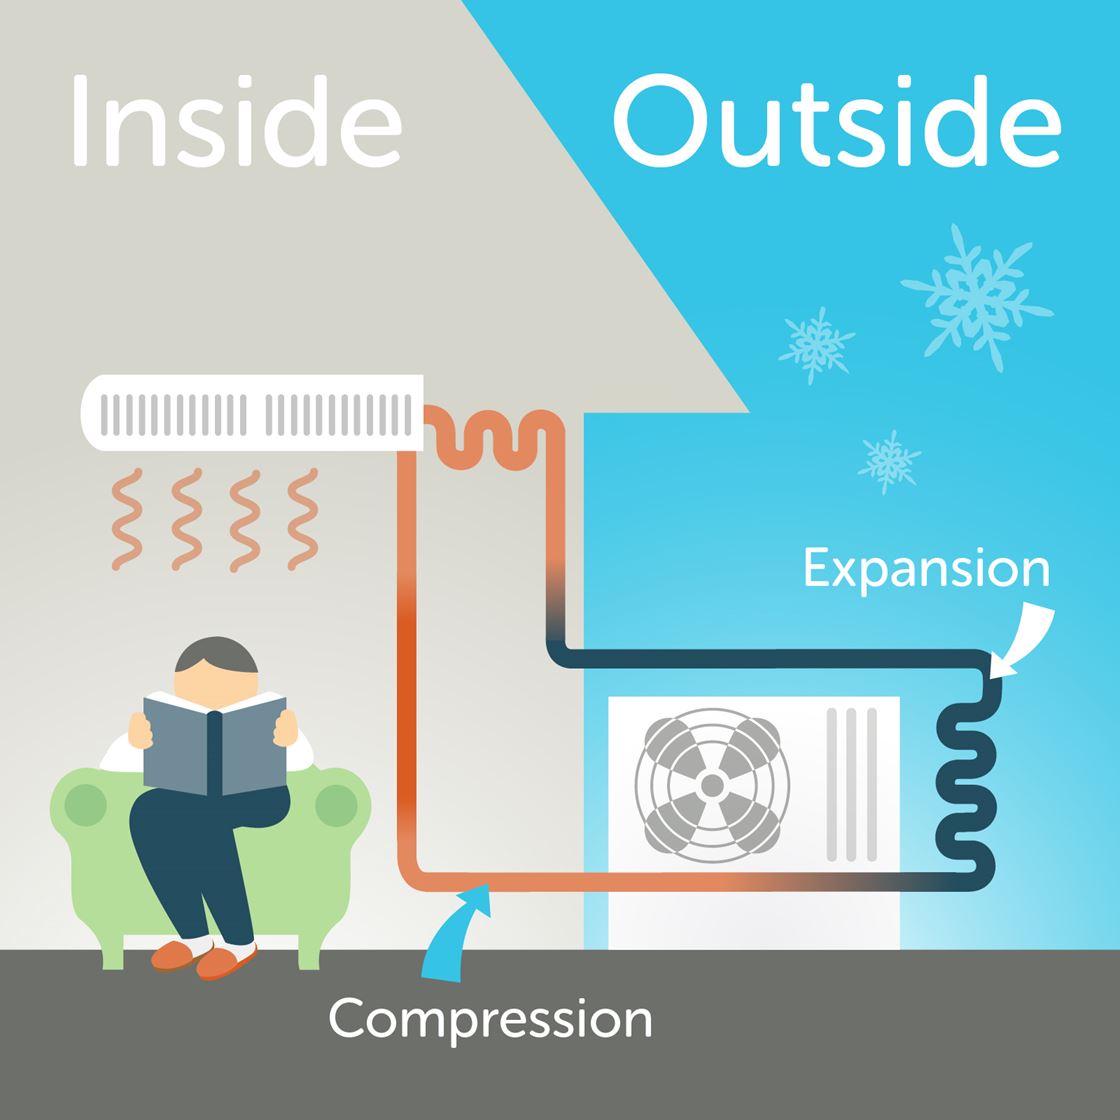 Eco-friendly Heat with Heat Pumps